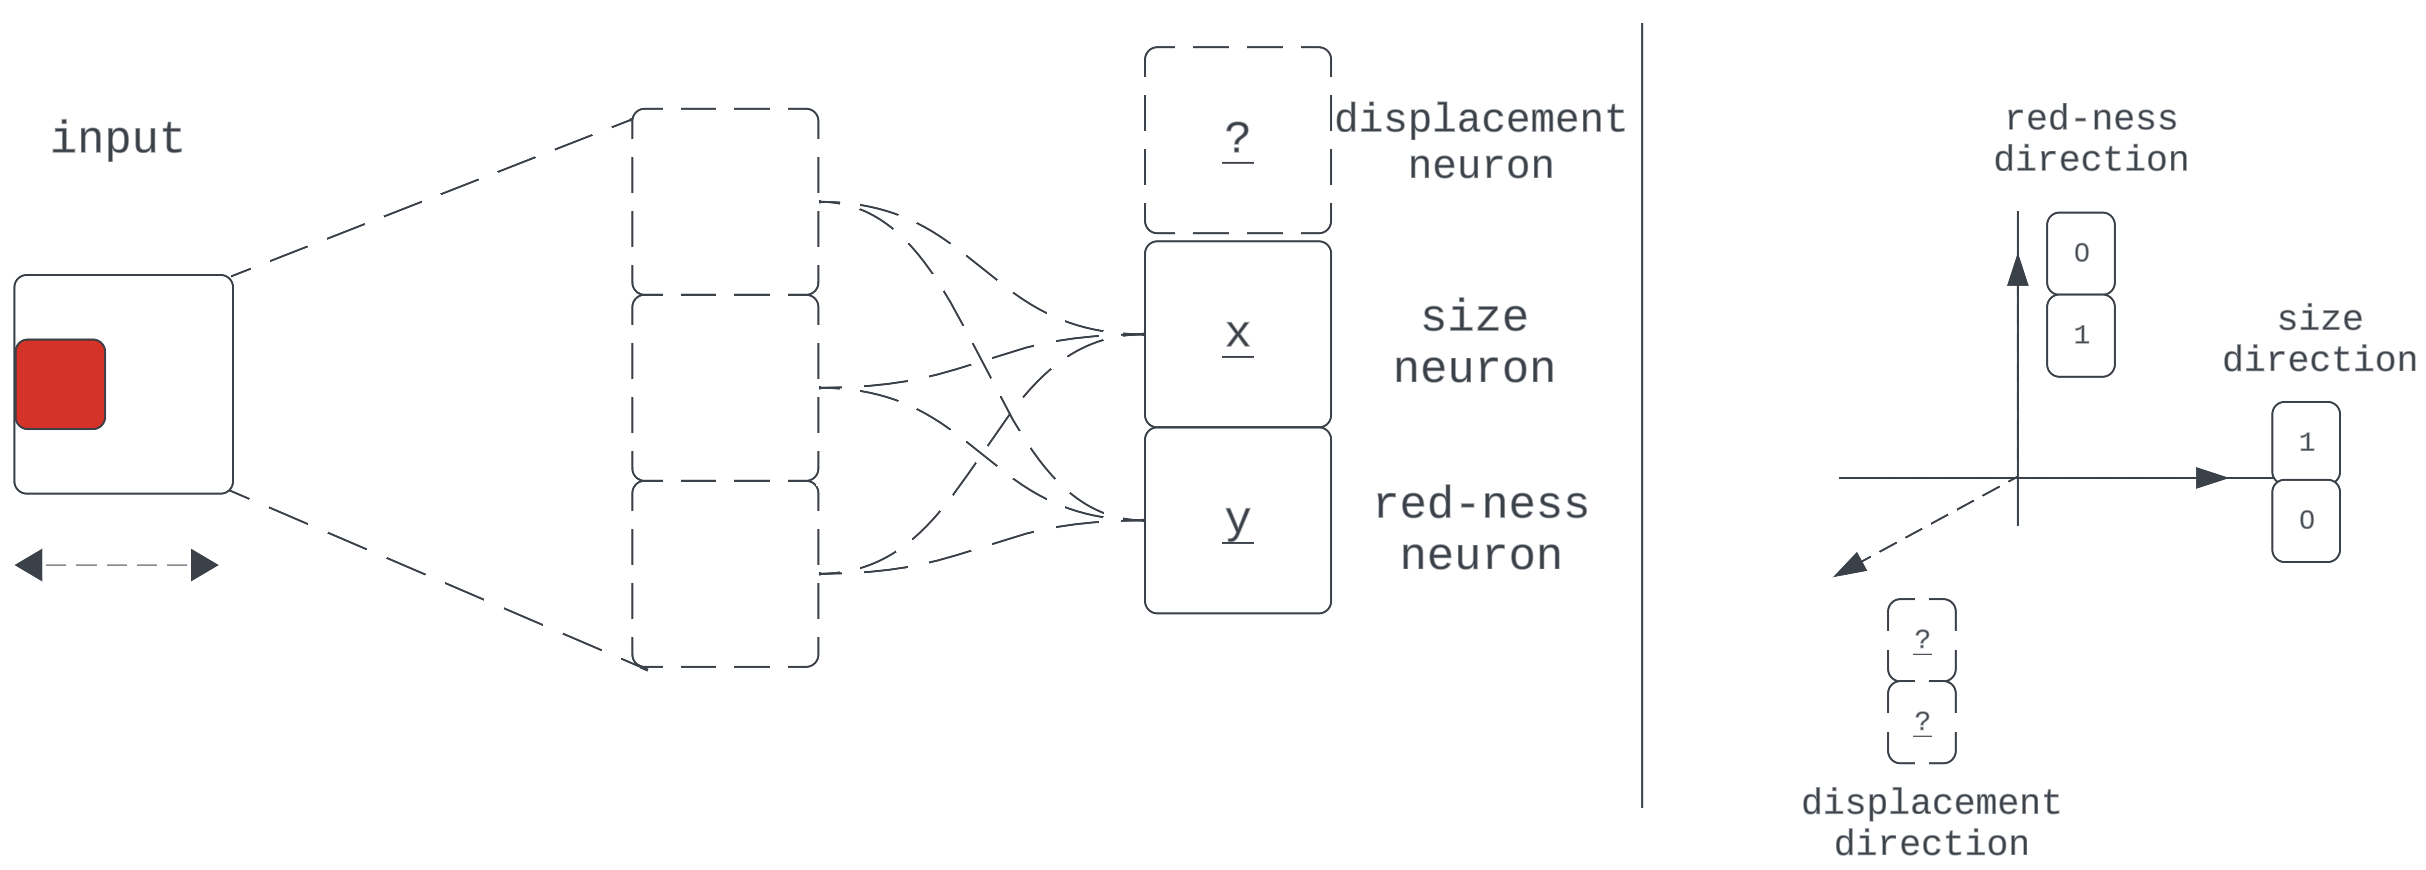 Our network with a new task, requiring it to propagate one more learned property of the input: center x-displacement.